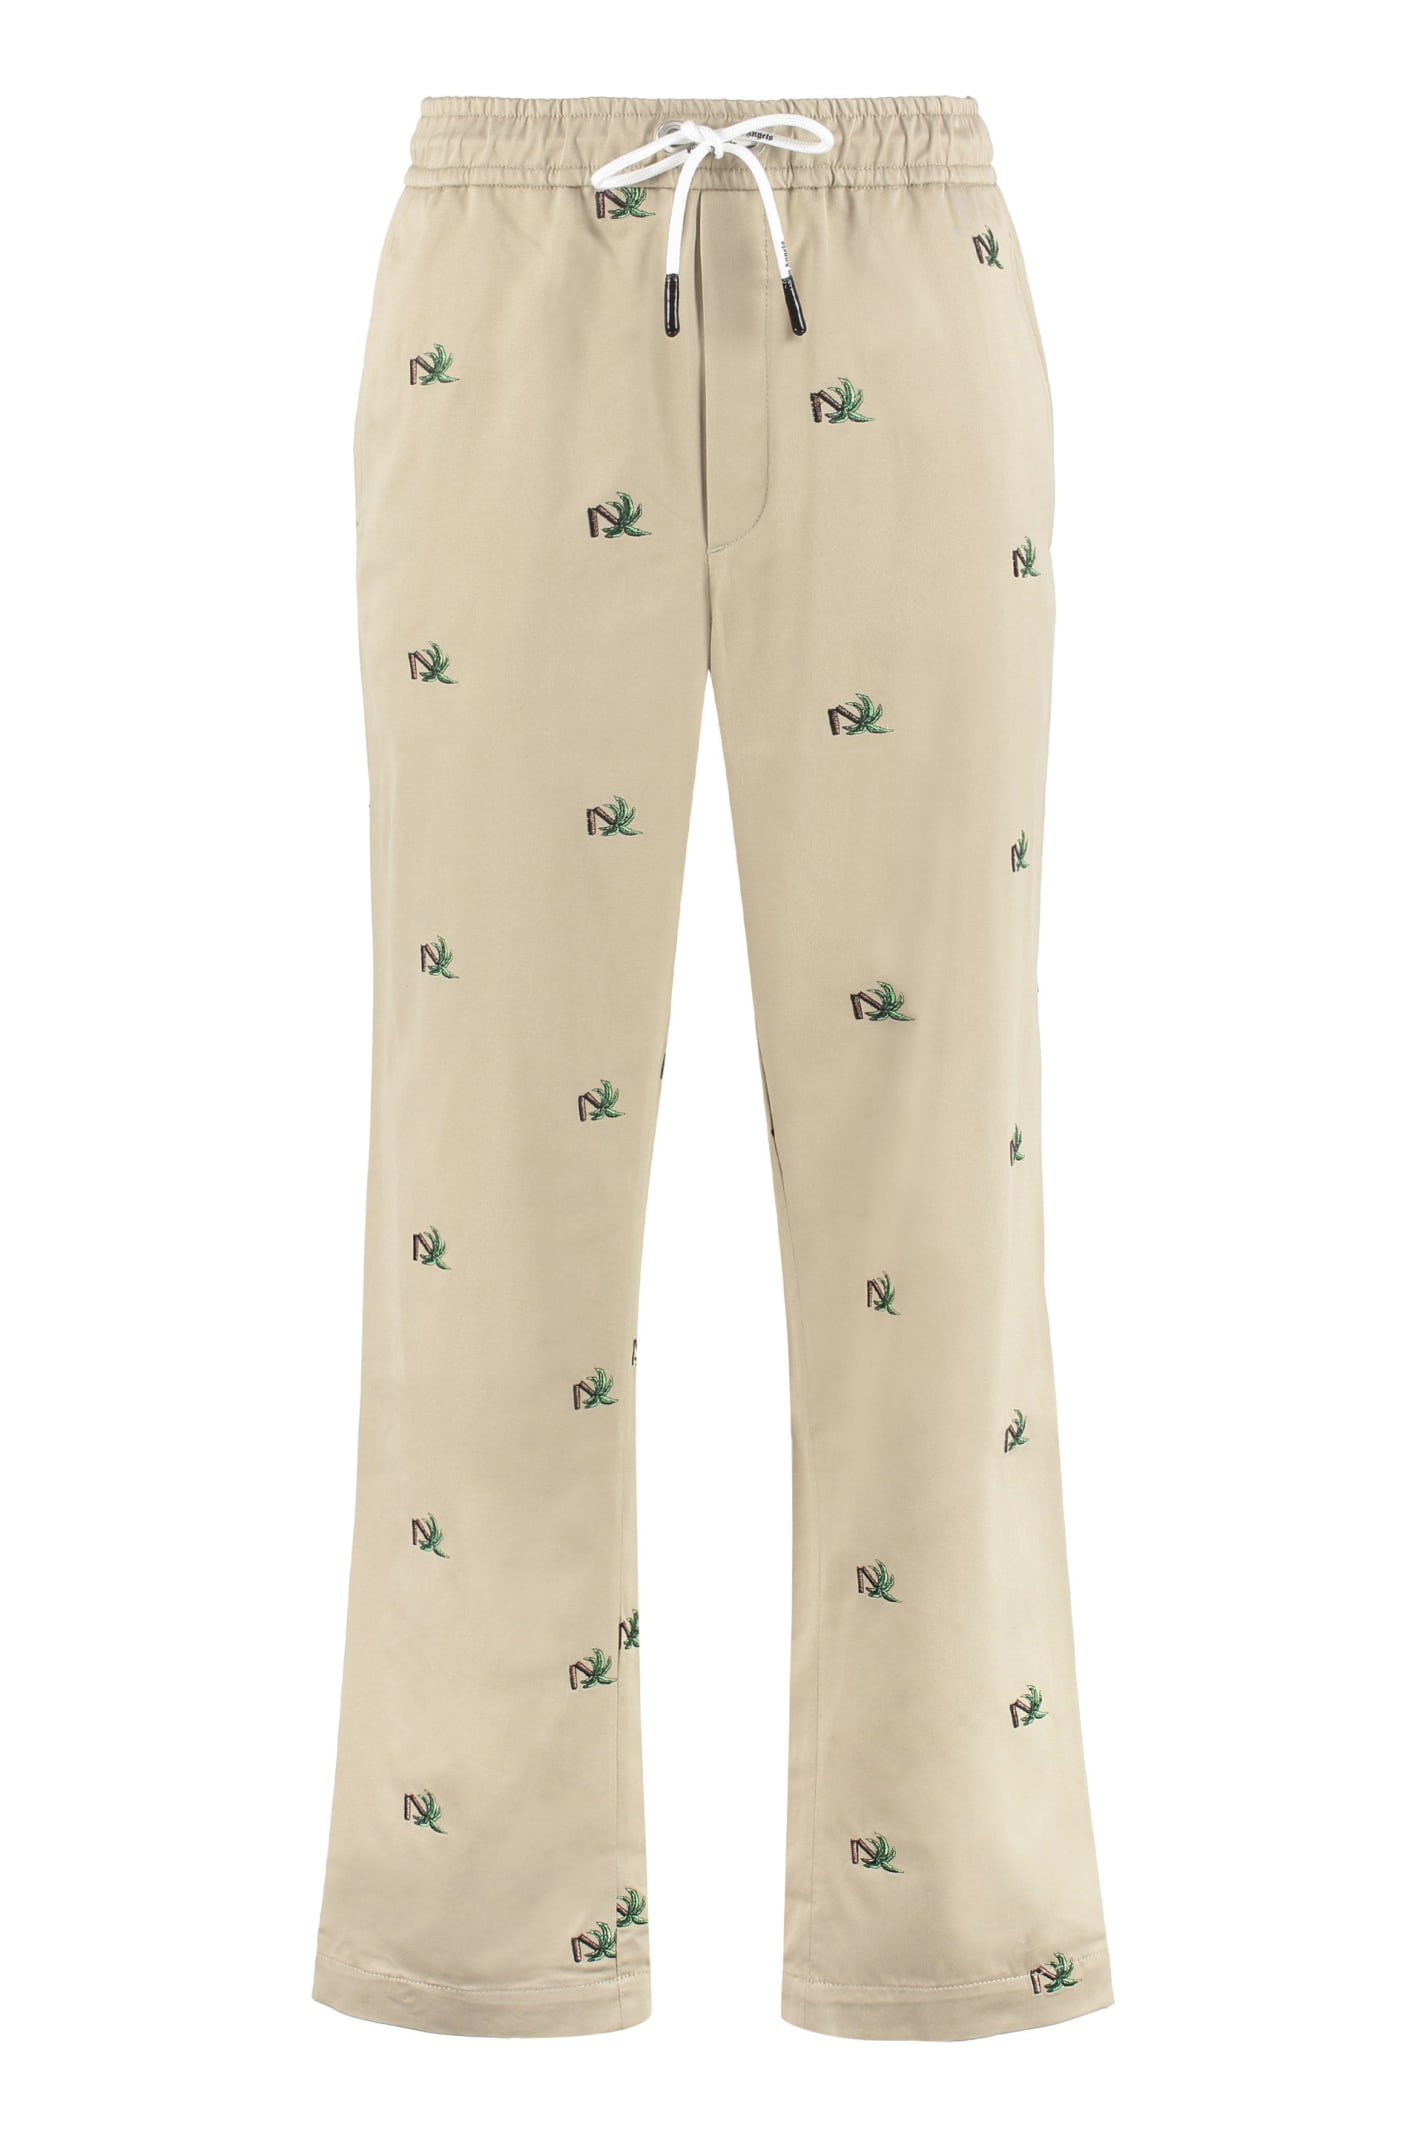 Palm Angels Embroidered Cotton Trousers